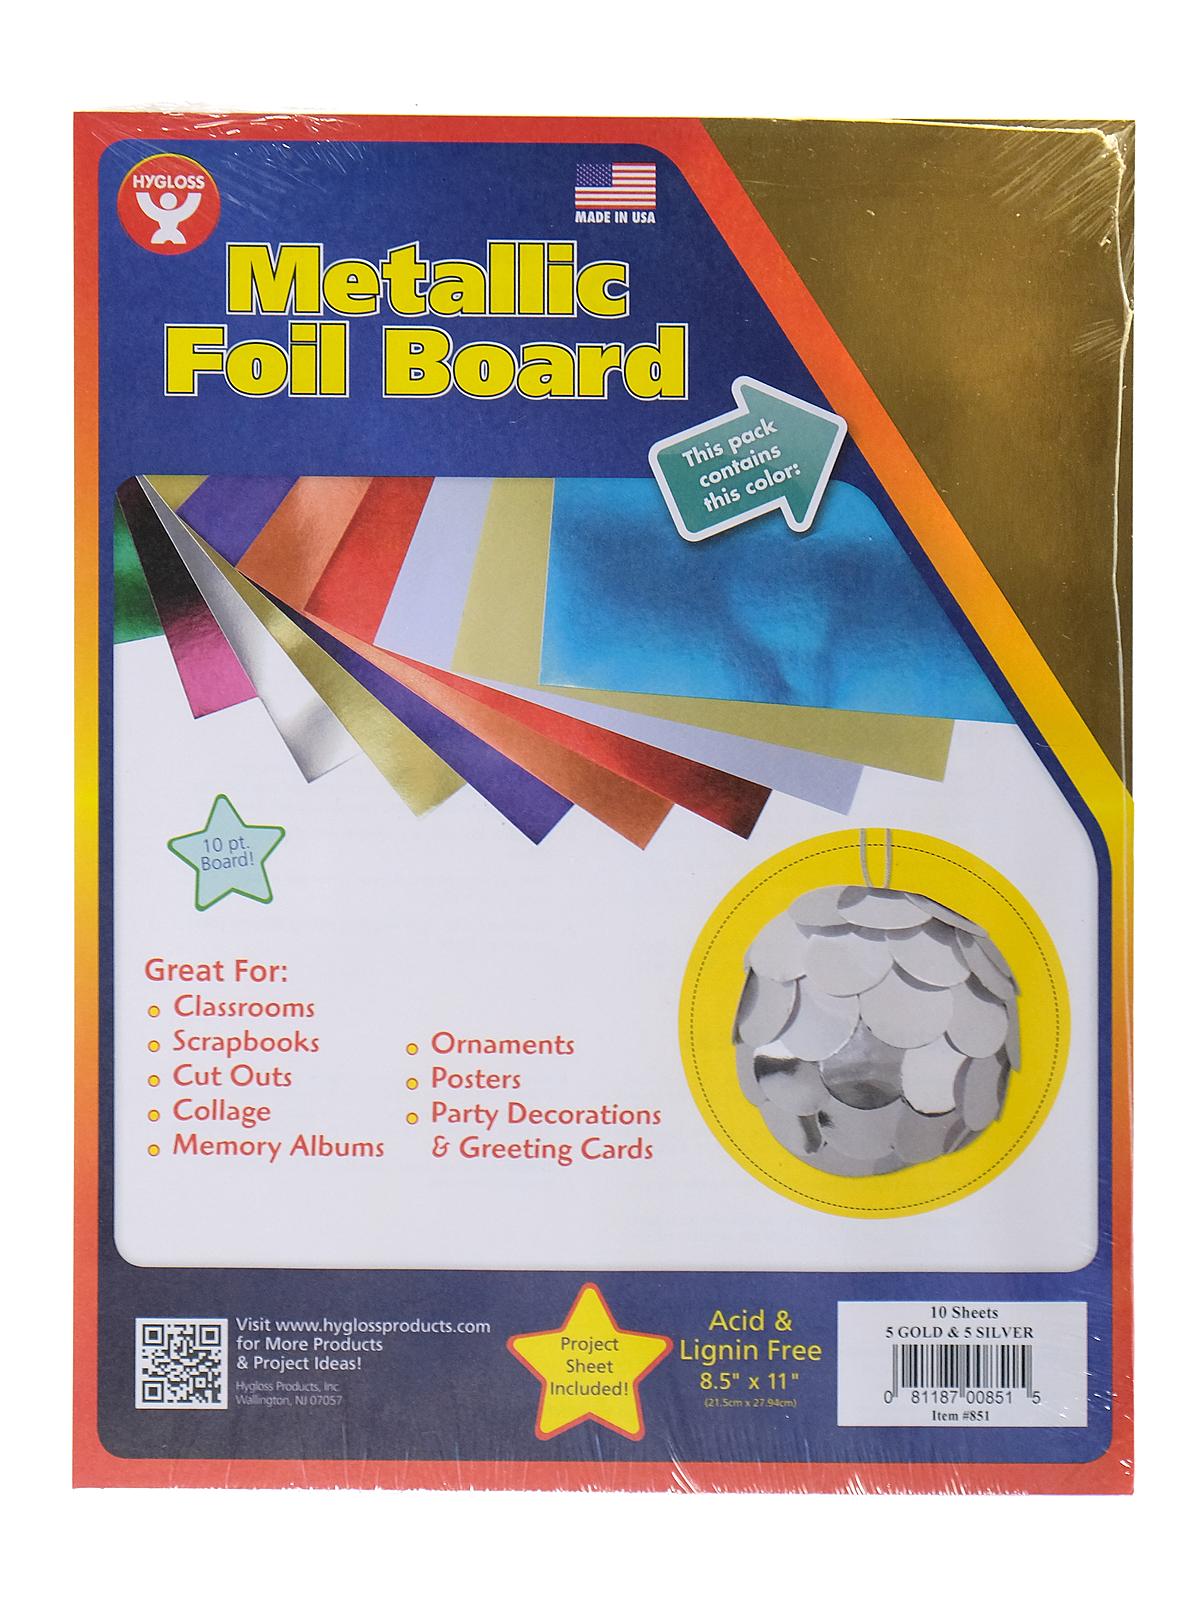 Metallic Foil Board gold and silver 8 1 2 in. x 11 in.